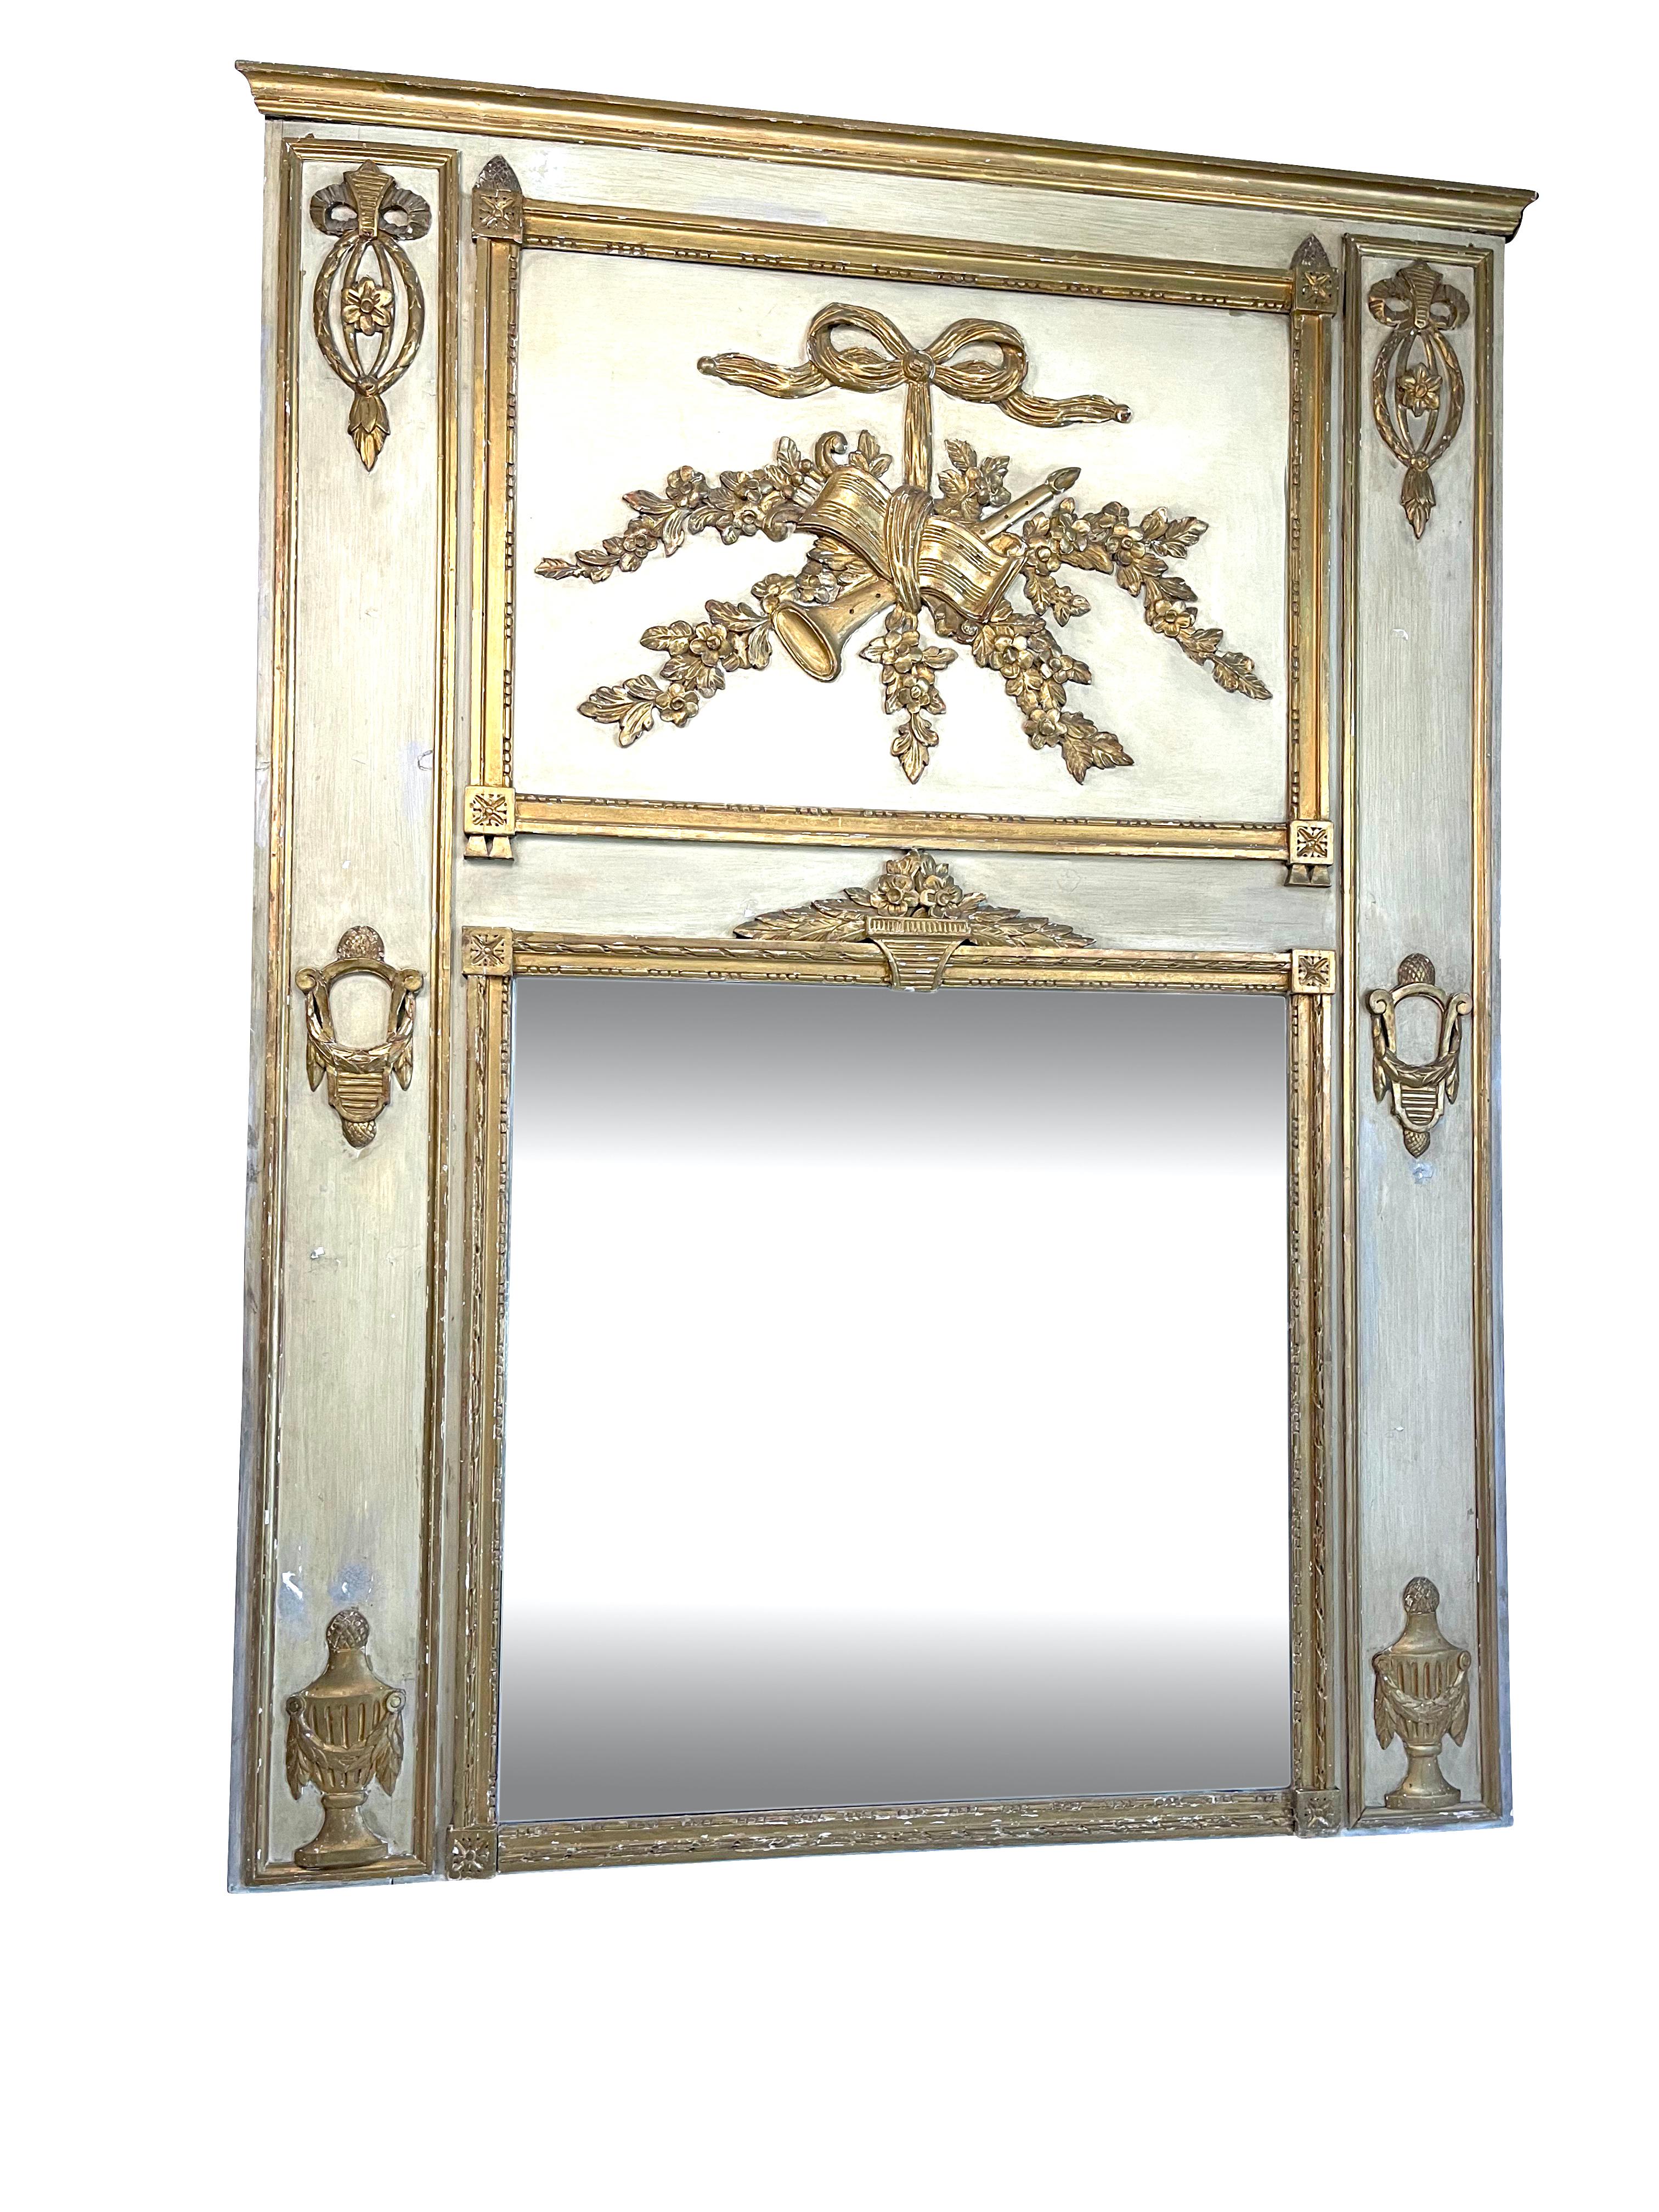 Antique French carved painted giltwood Trumeau mirror, white paint with gold decoration measuring 67